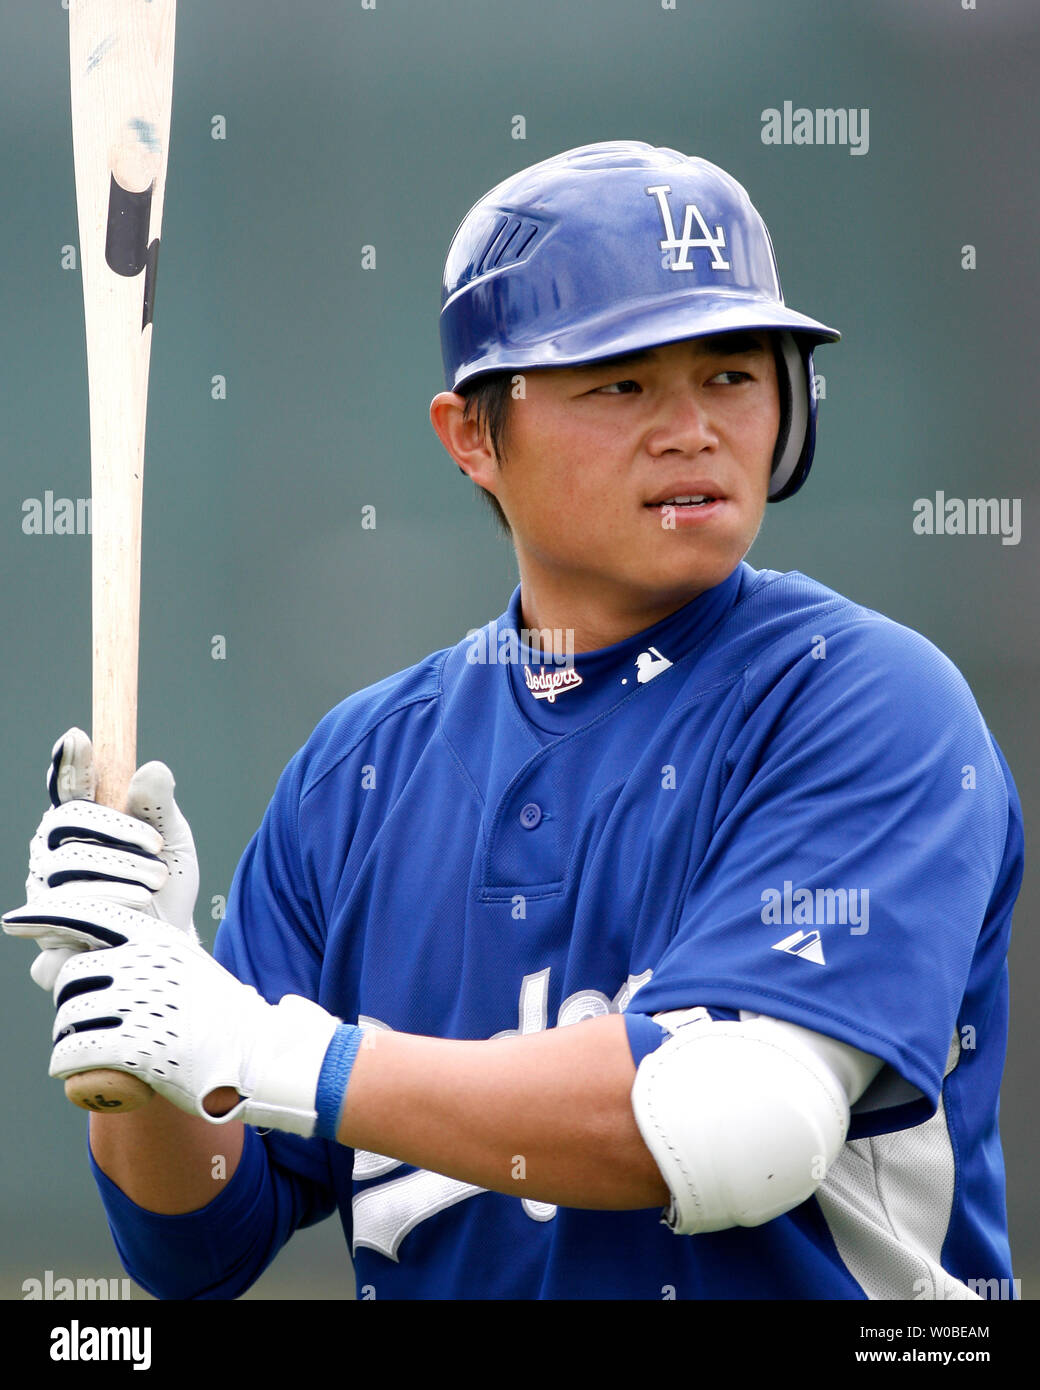 Los Angeles Dodgers infielder Chin Lung Hu, of Taiwan, waits for pitch during spring training February 25, 2007 at Dodgertown in Vero Beach, Florida.  (UPI Photo/Jon SooHoo) Stock Photo